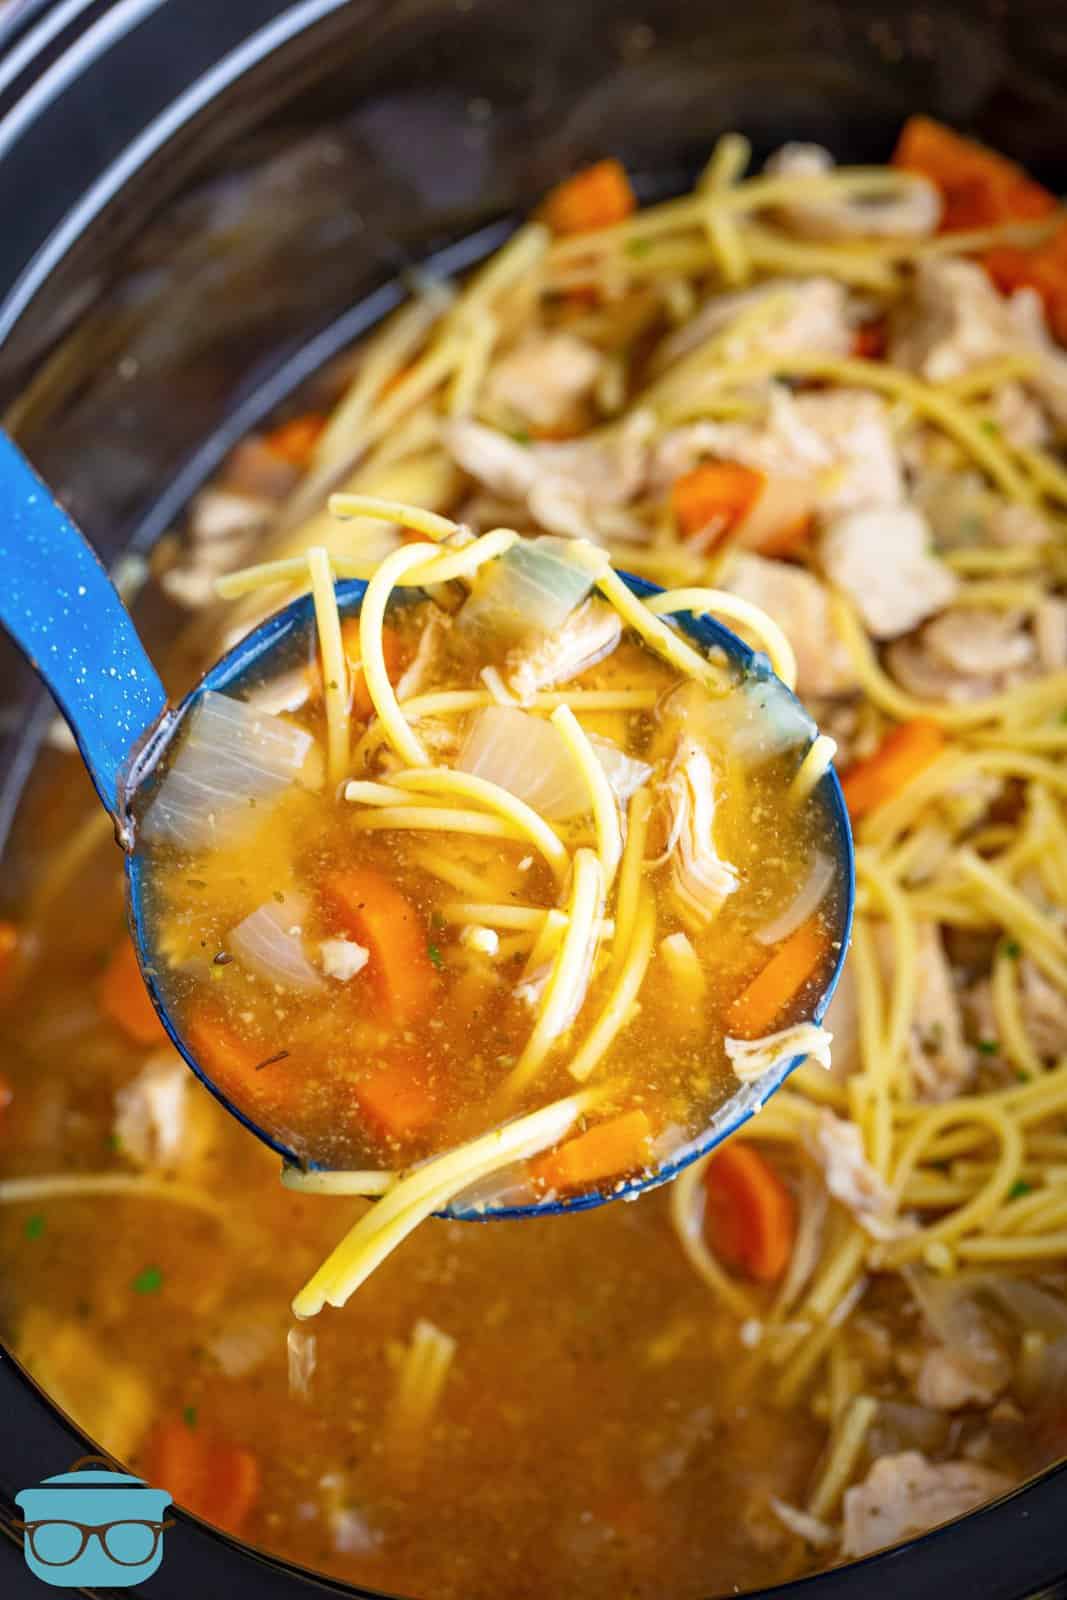 A ladle holding Chicken Noodle Soup overtop of the Slow Cooker.